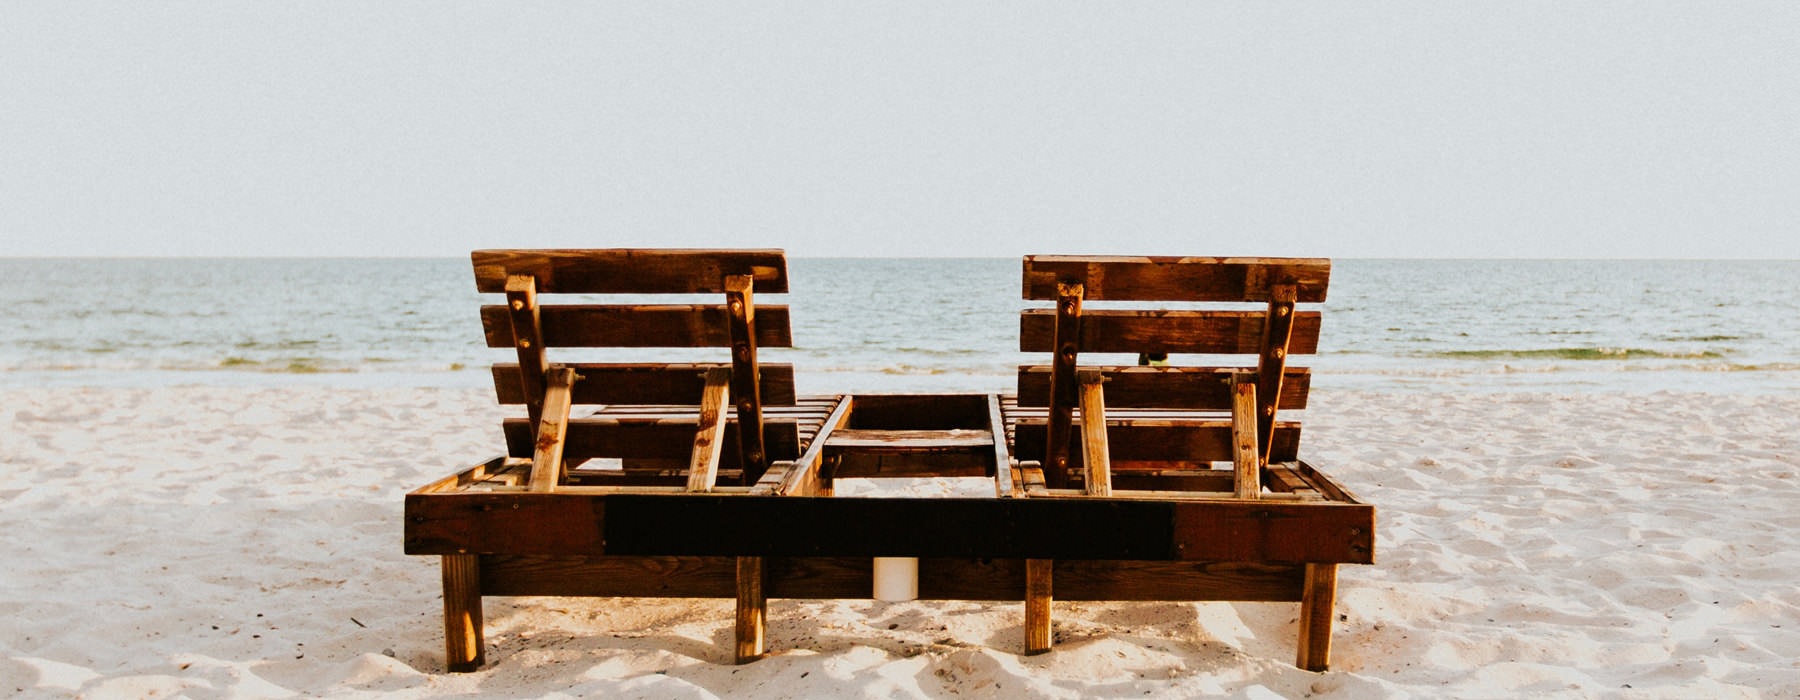 Lifestyle photo of wood framed beach chairs on the shore looking toward the ocean